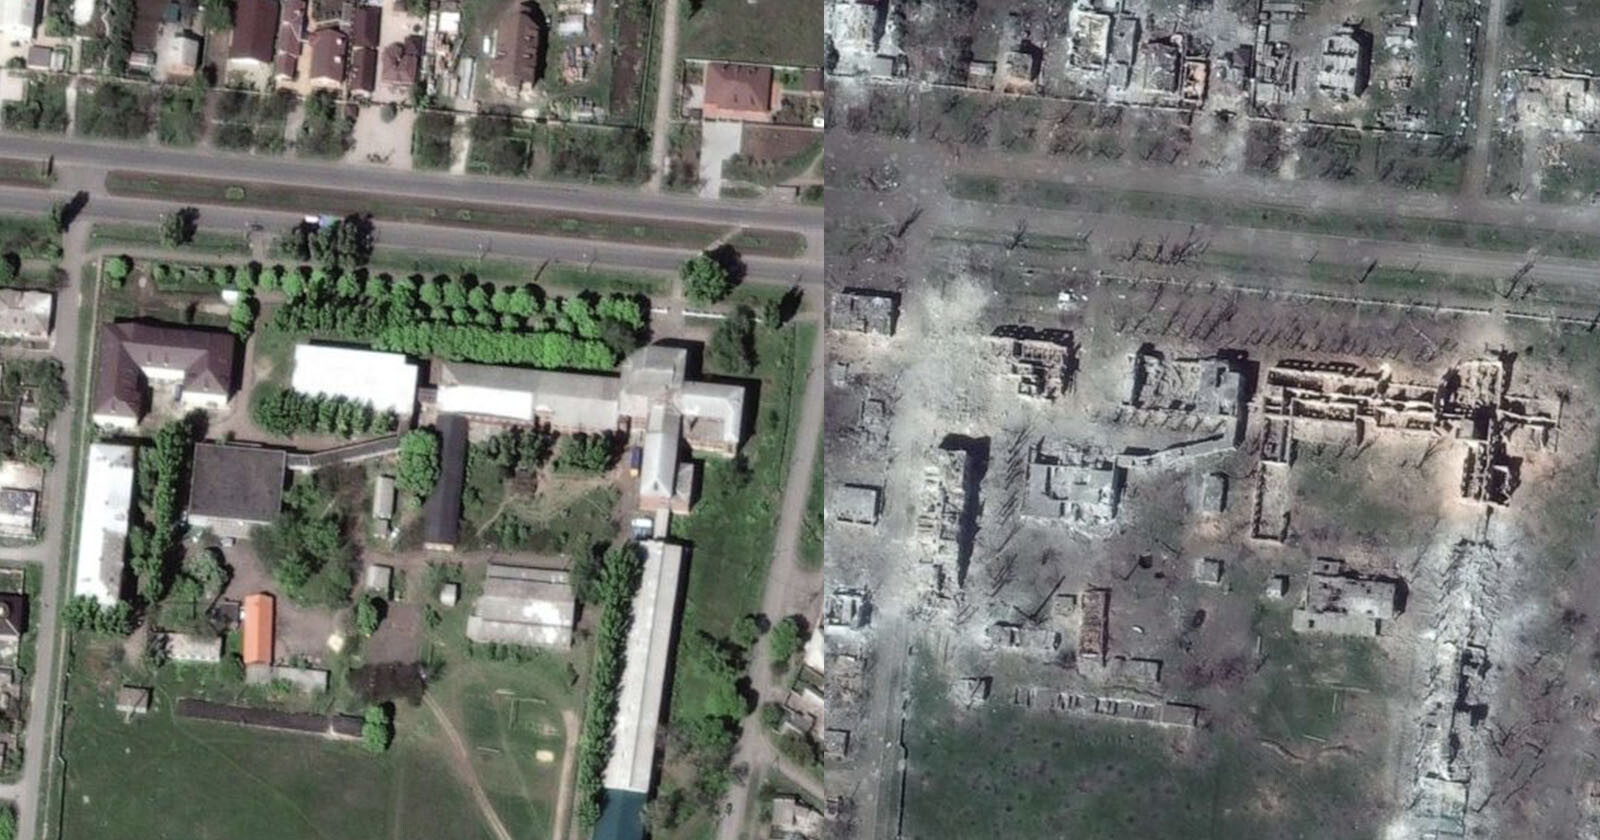 Shocking Before and After Satellite Imagery of Embattled City in Ukraine